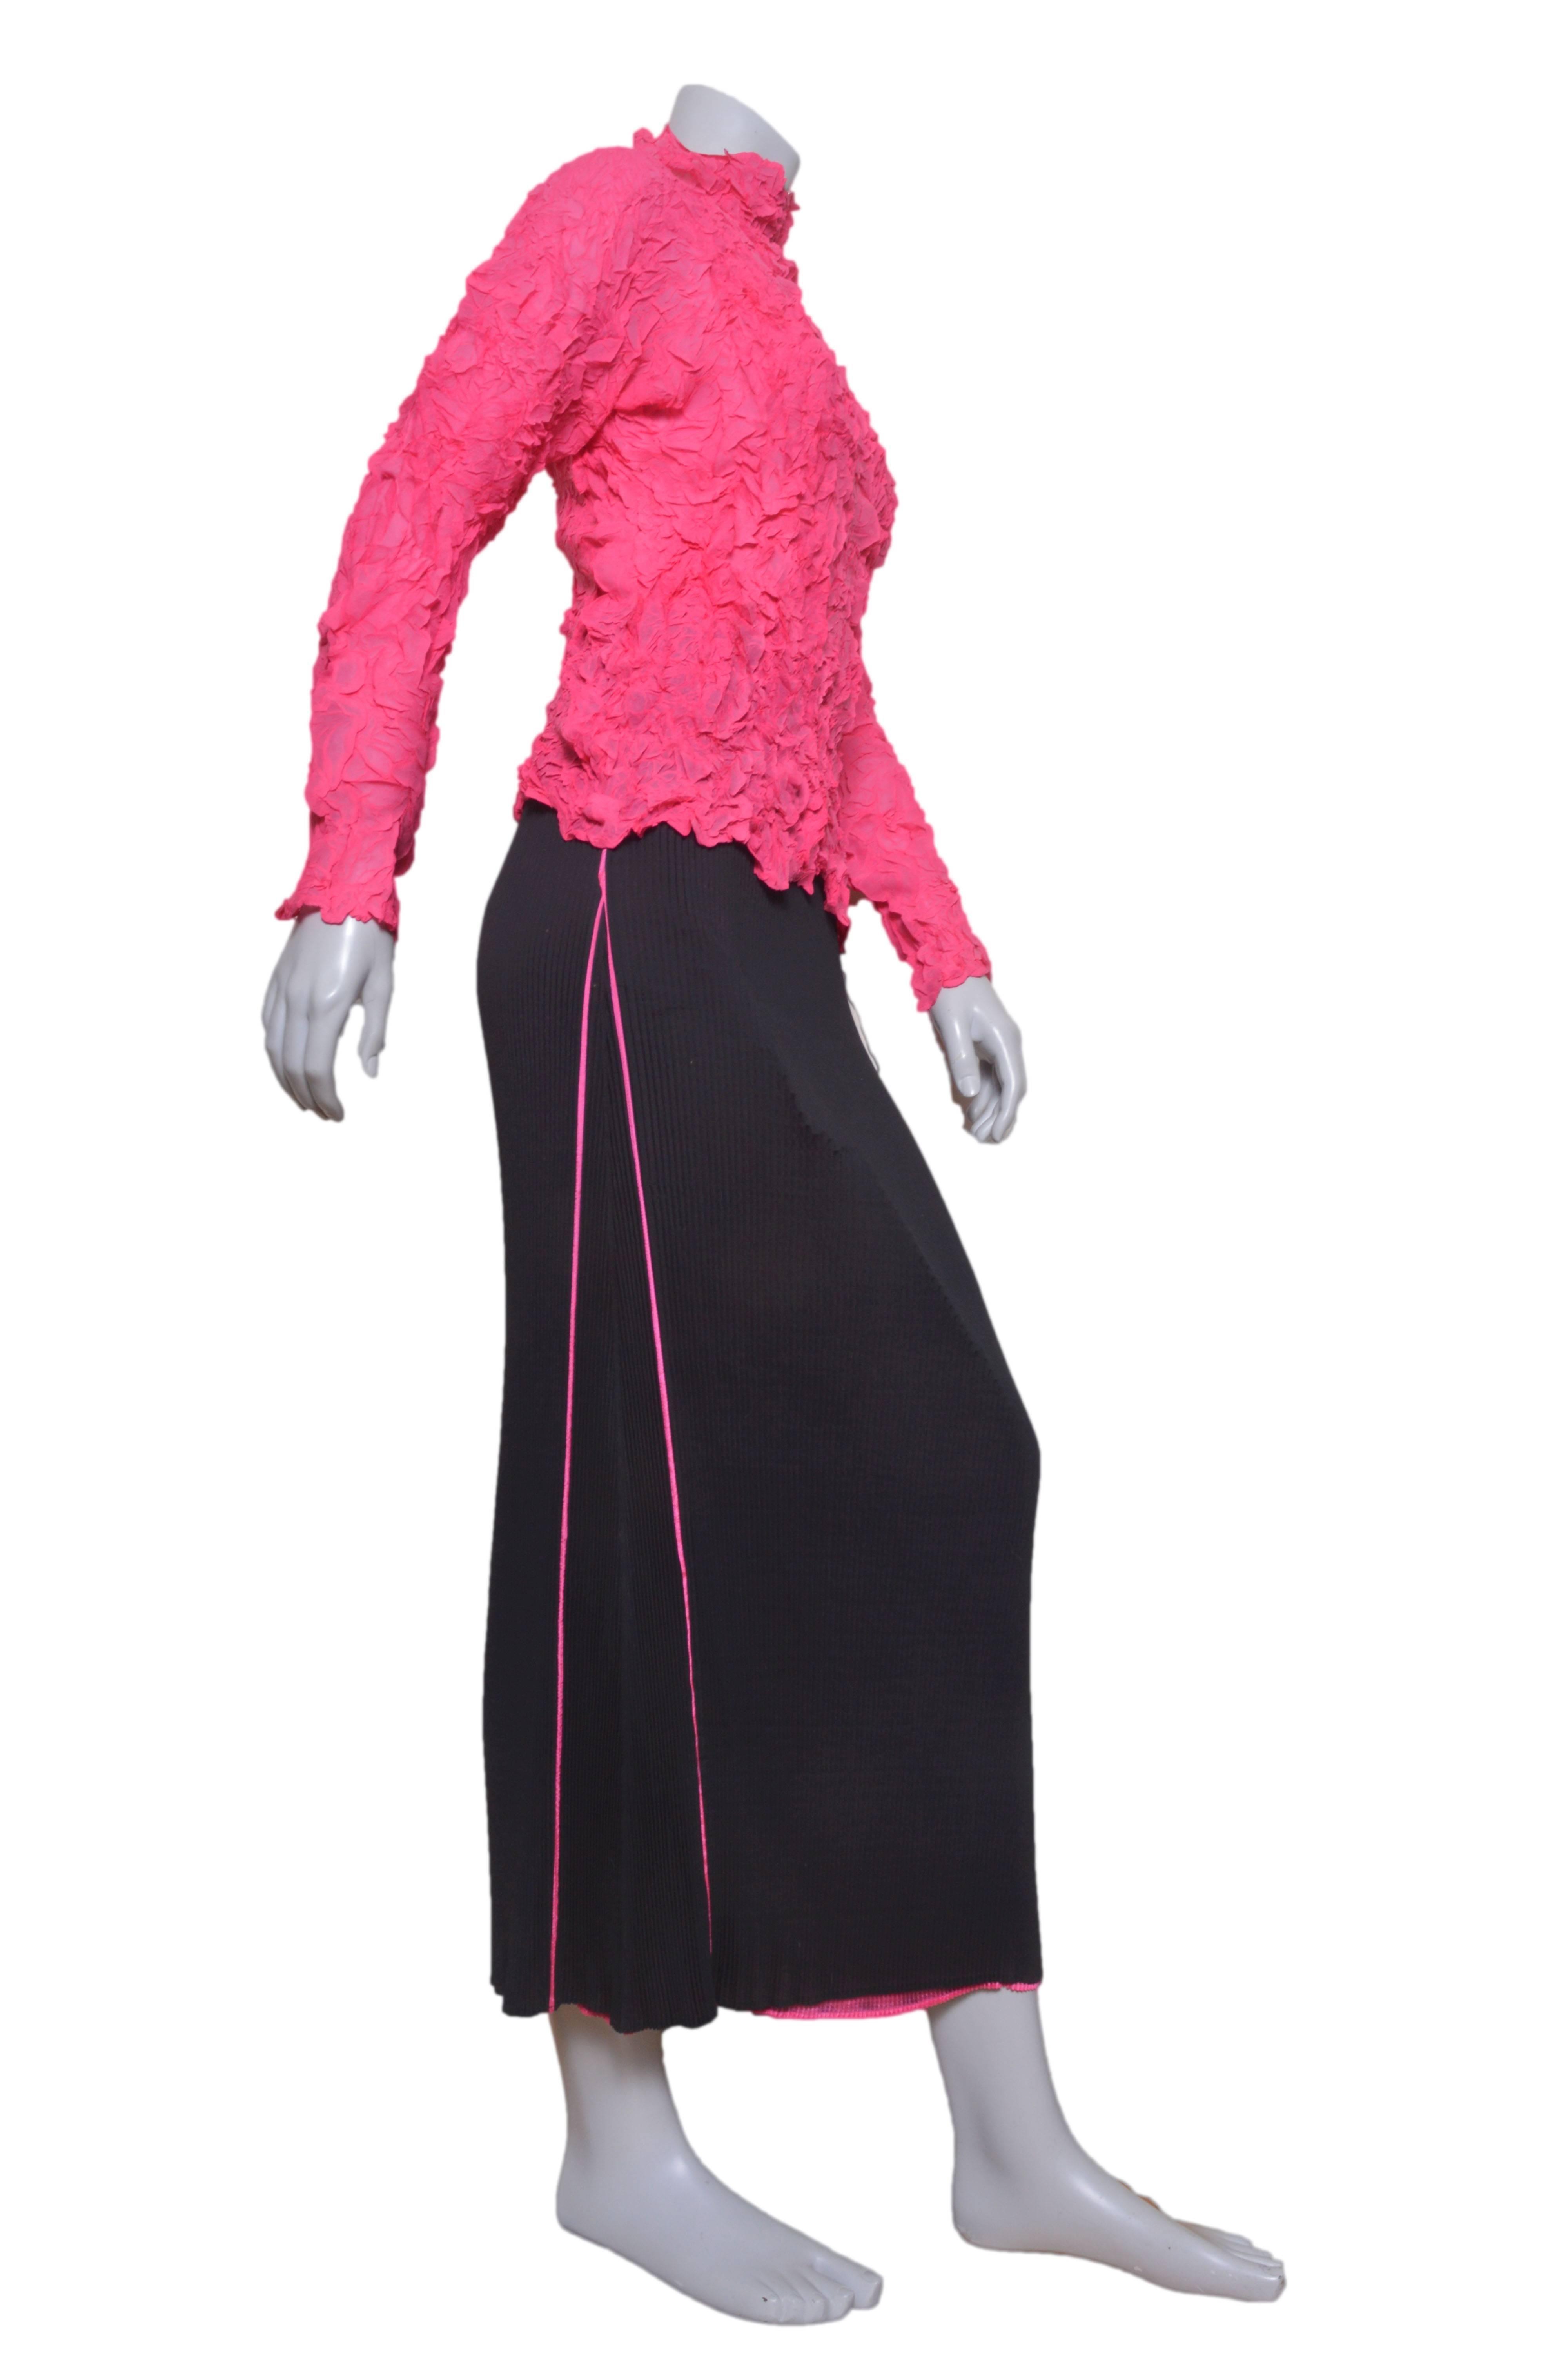 Stunning Issey Miyake blouse and skirt set.
Lightweight crinkled hot pink top with high neck and neck long sleeves.
Pleated long black straight skirt with pink pipping and underskirt.
Elastic waist.
Tagged a size Medium.

Top